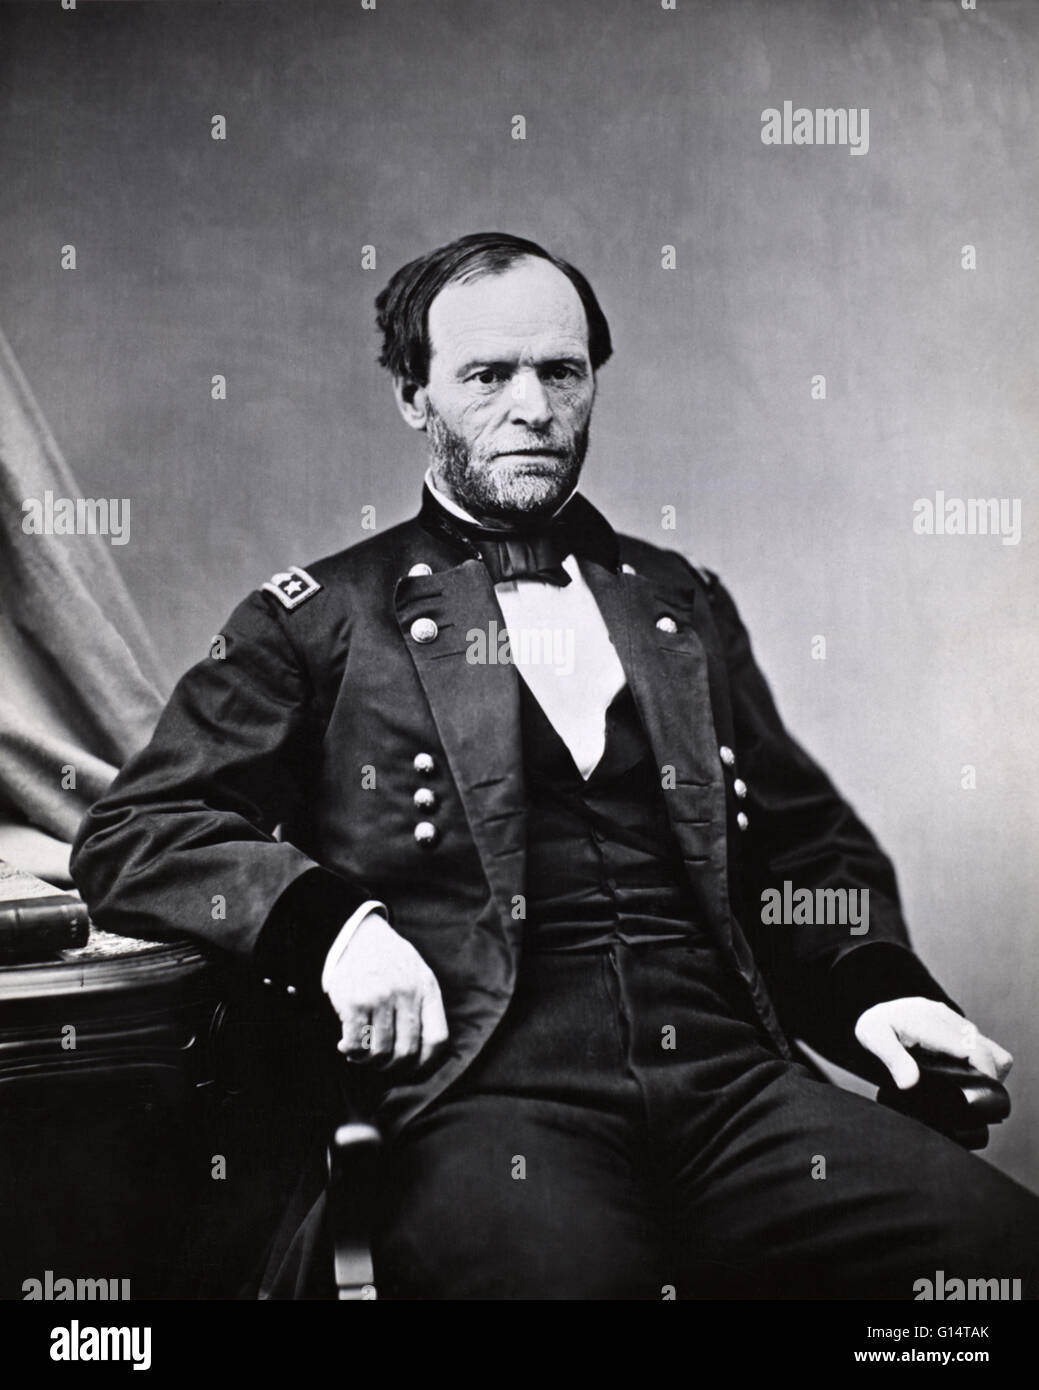 Sherman photo taken about 1865-1868. William Tecumseh Sherman (February 8, 1820 - February 14, 1891) was an American soldier, businessman, educator and author. He served as a General in the Union Army during the American Civil War (1861-65), for which he Stock Photo